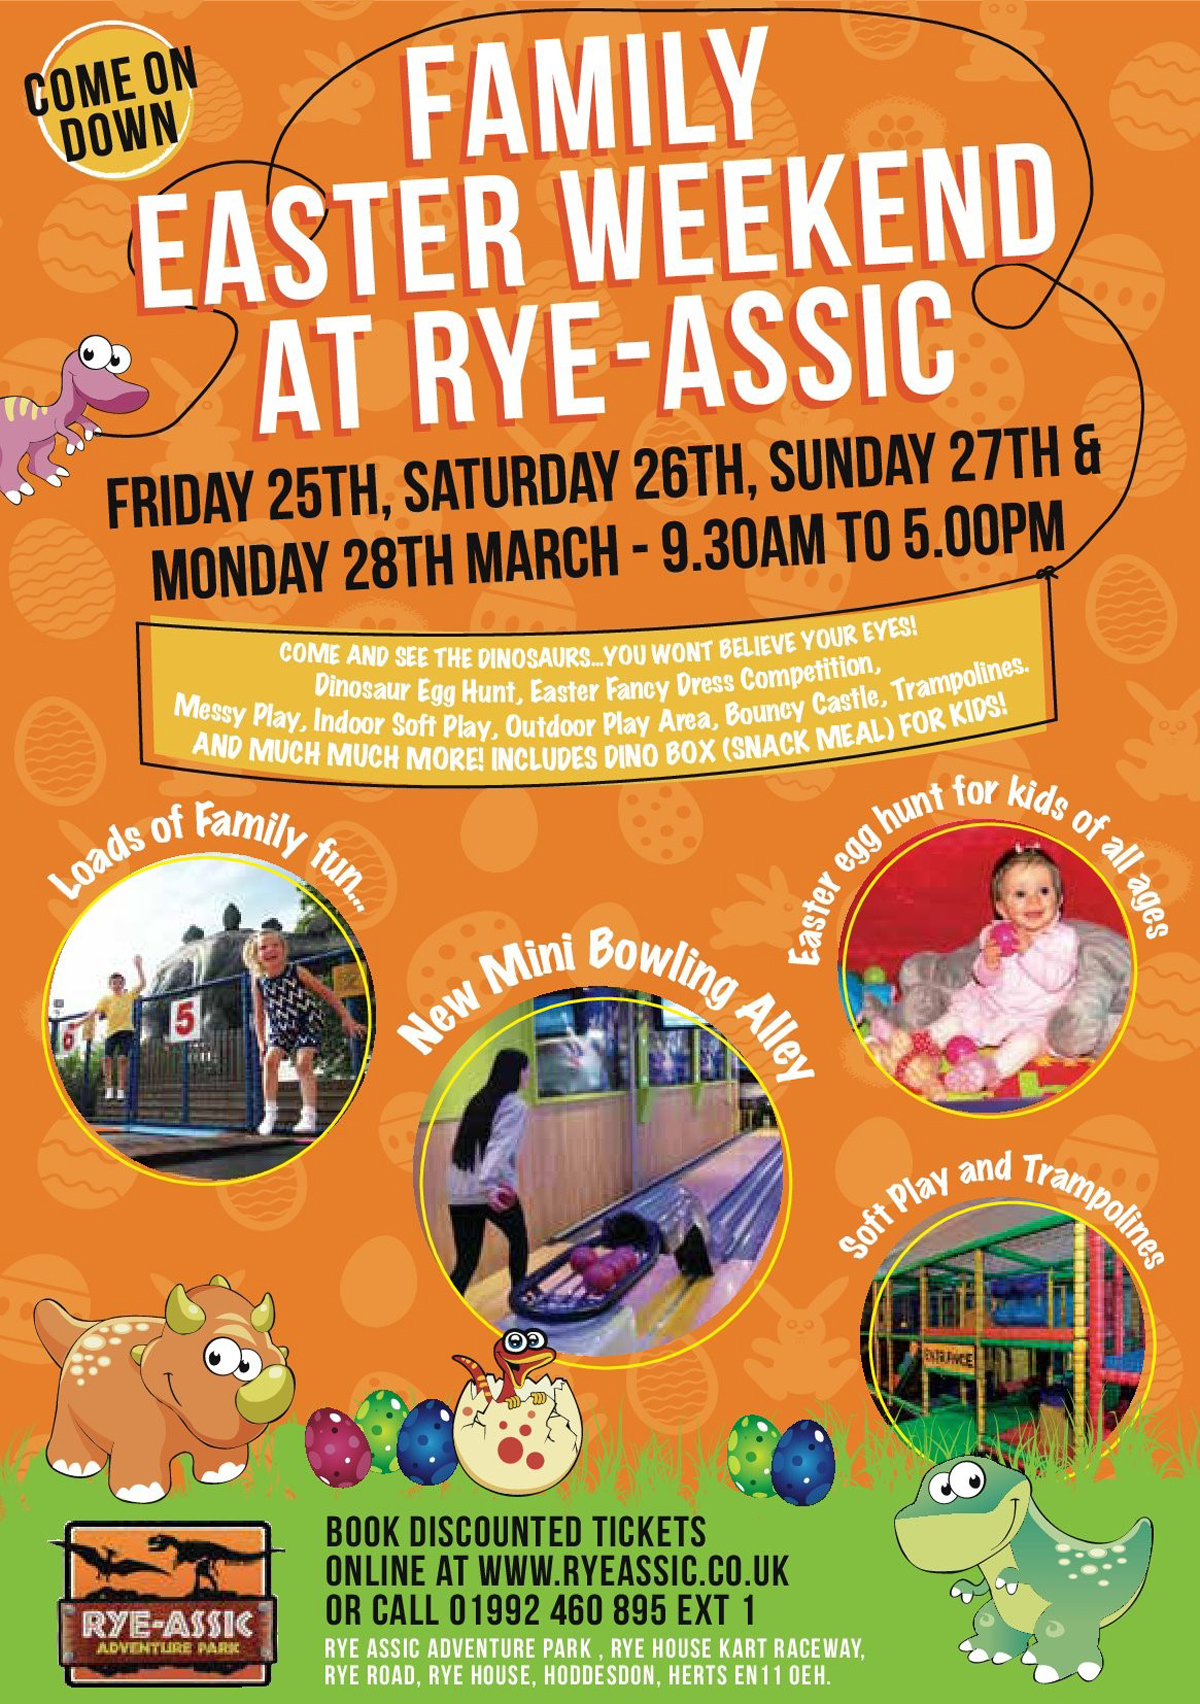 Family Easter Weekend At Rye-Assic Adventure Park